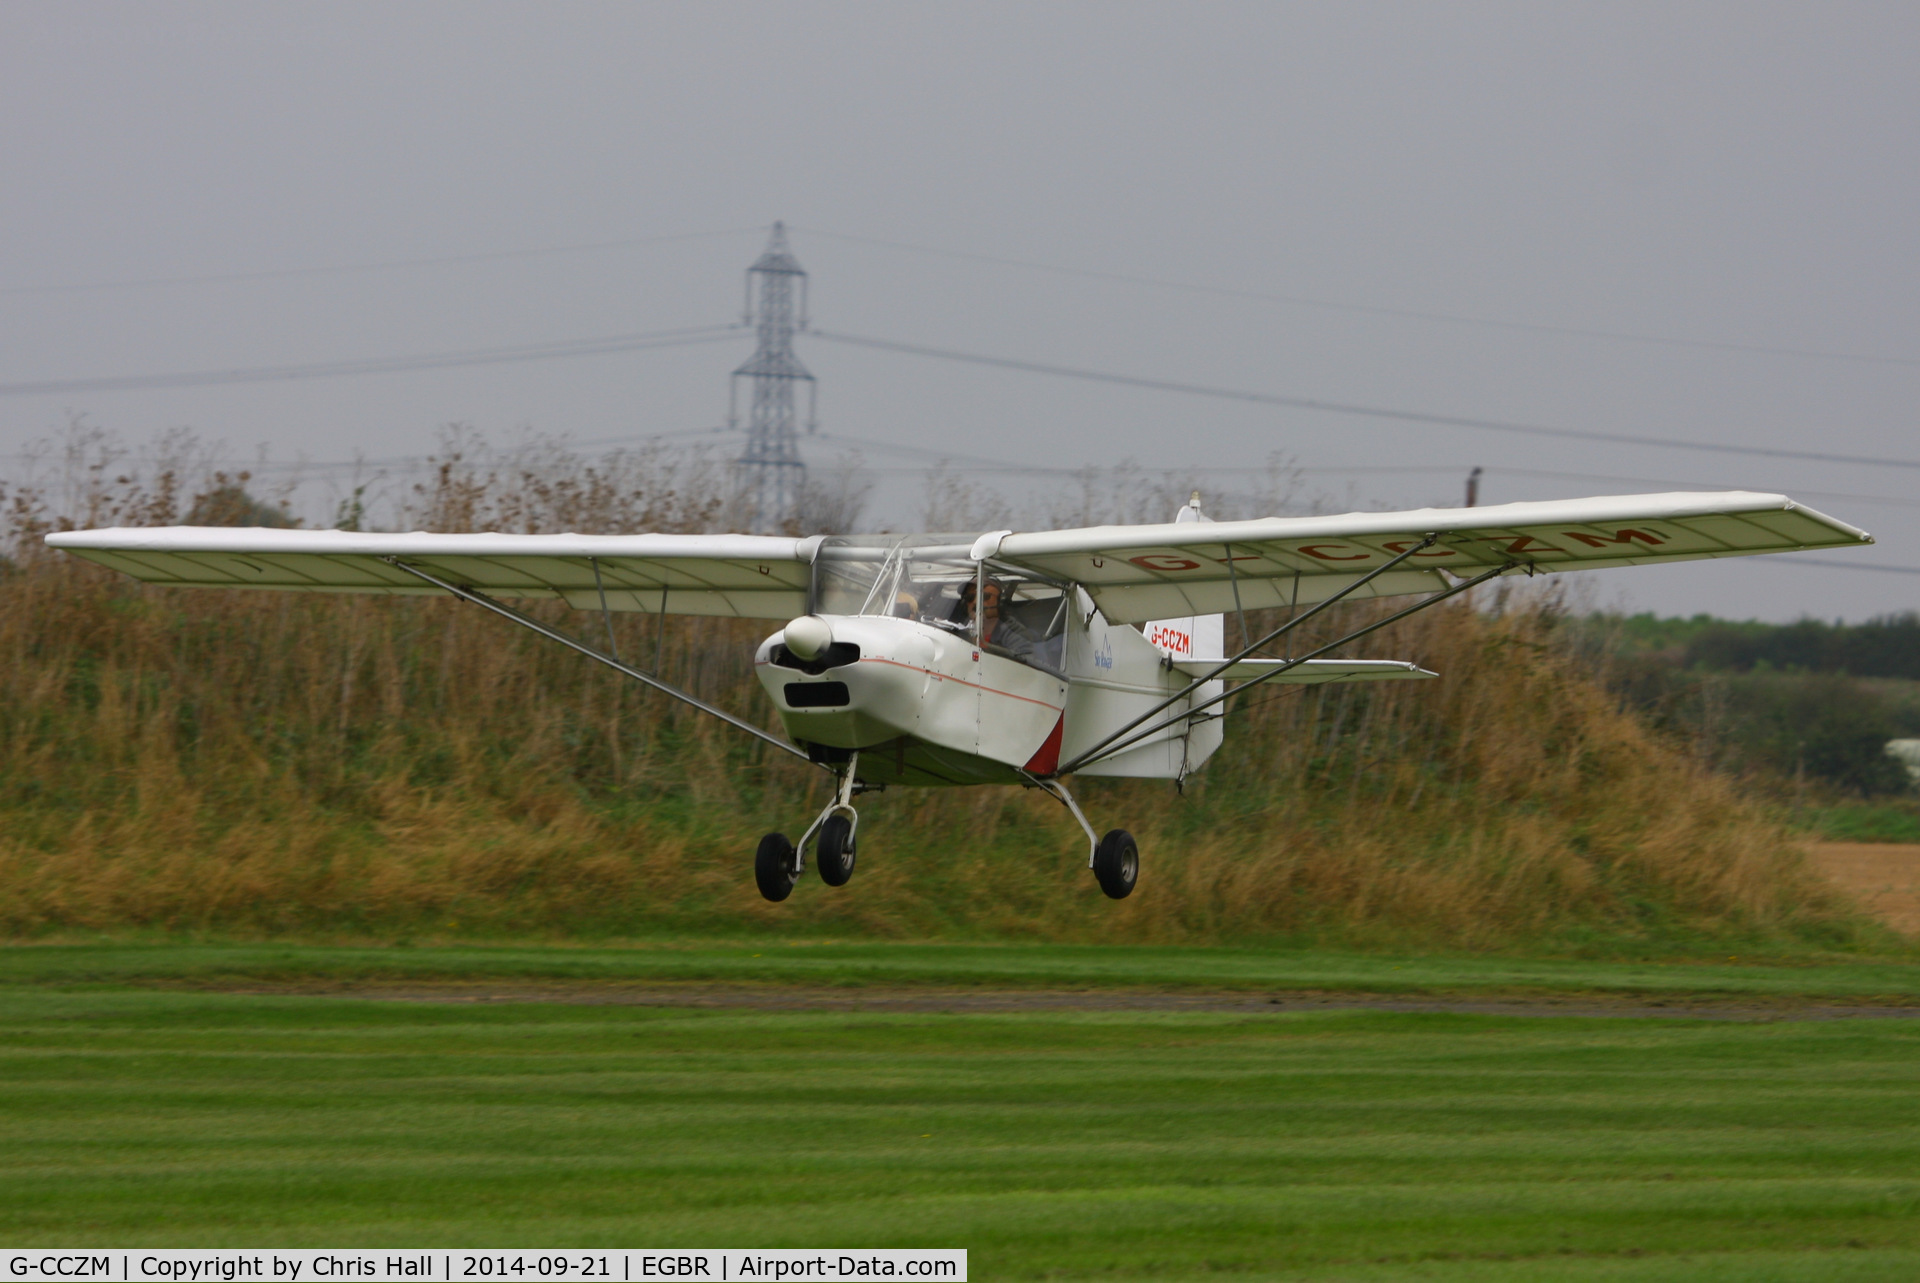 G-CCZM, 2004 Skyranger 912S(1) C/N BMAA/HB/372, at Breighton's Heli Fly-in, 2014